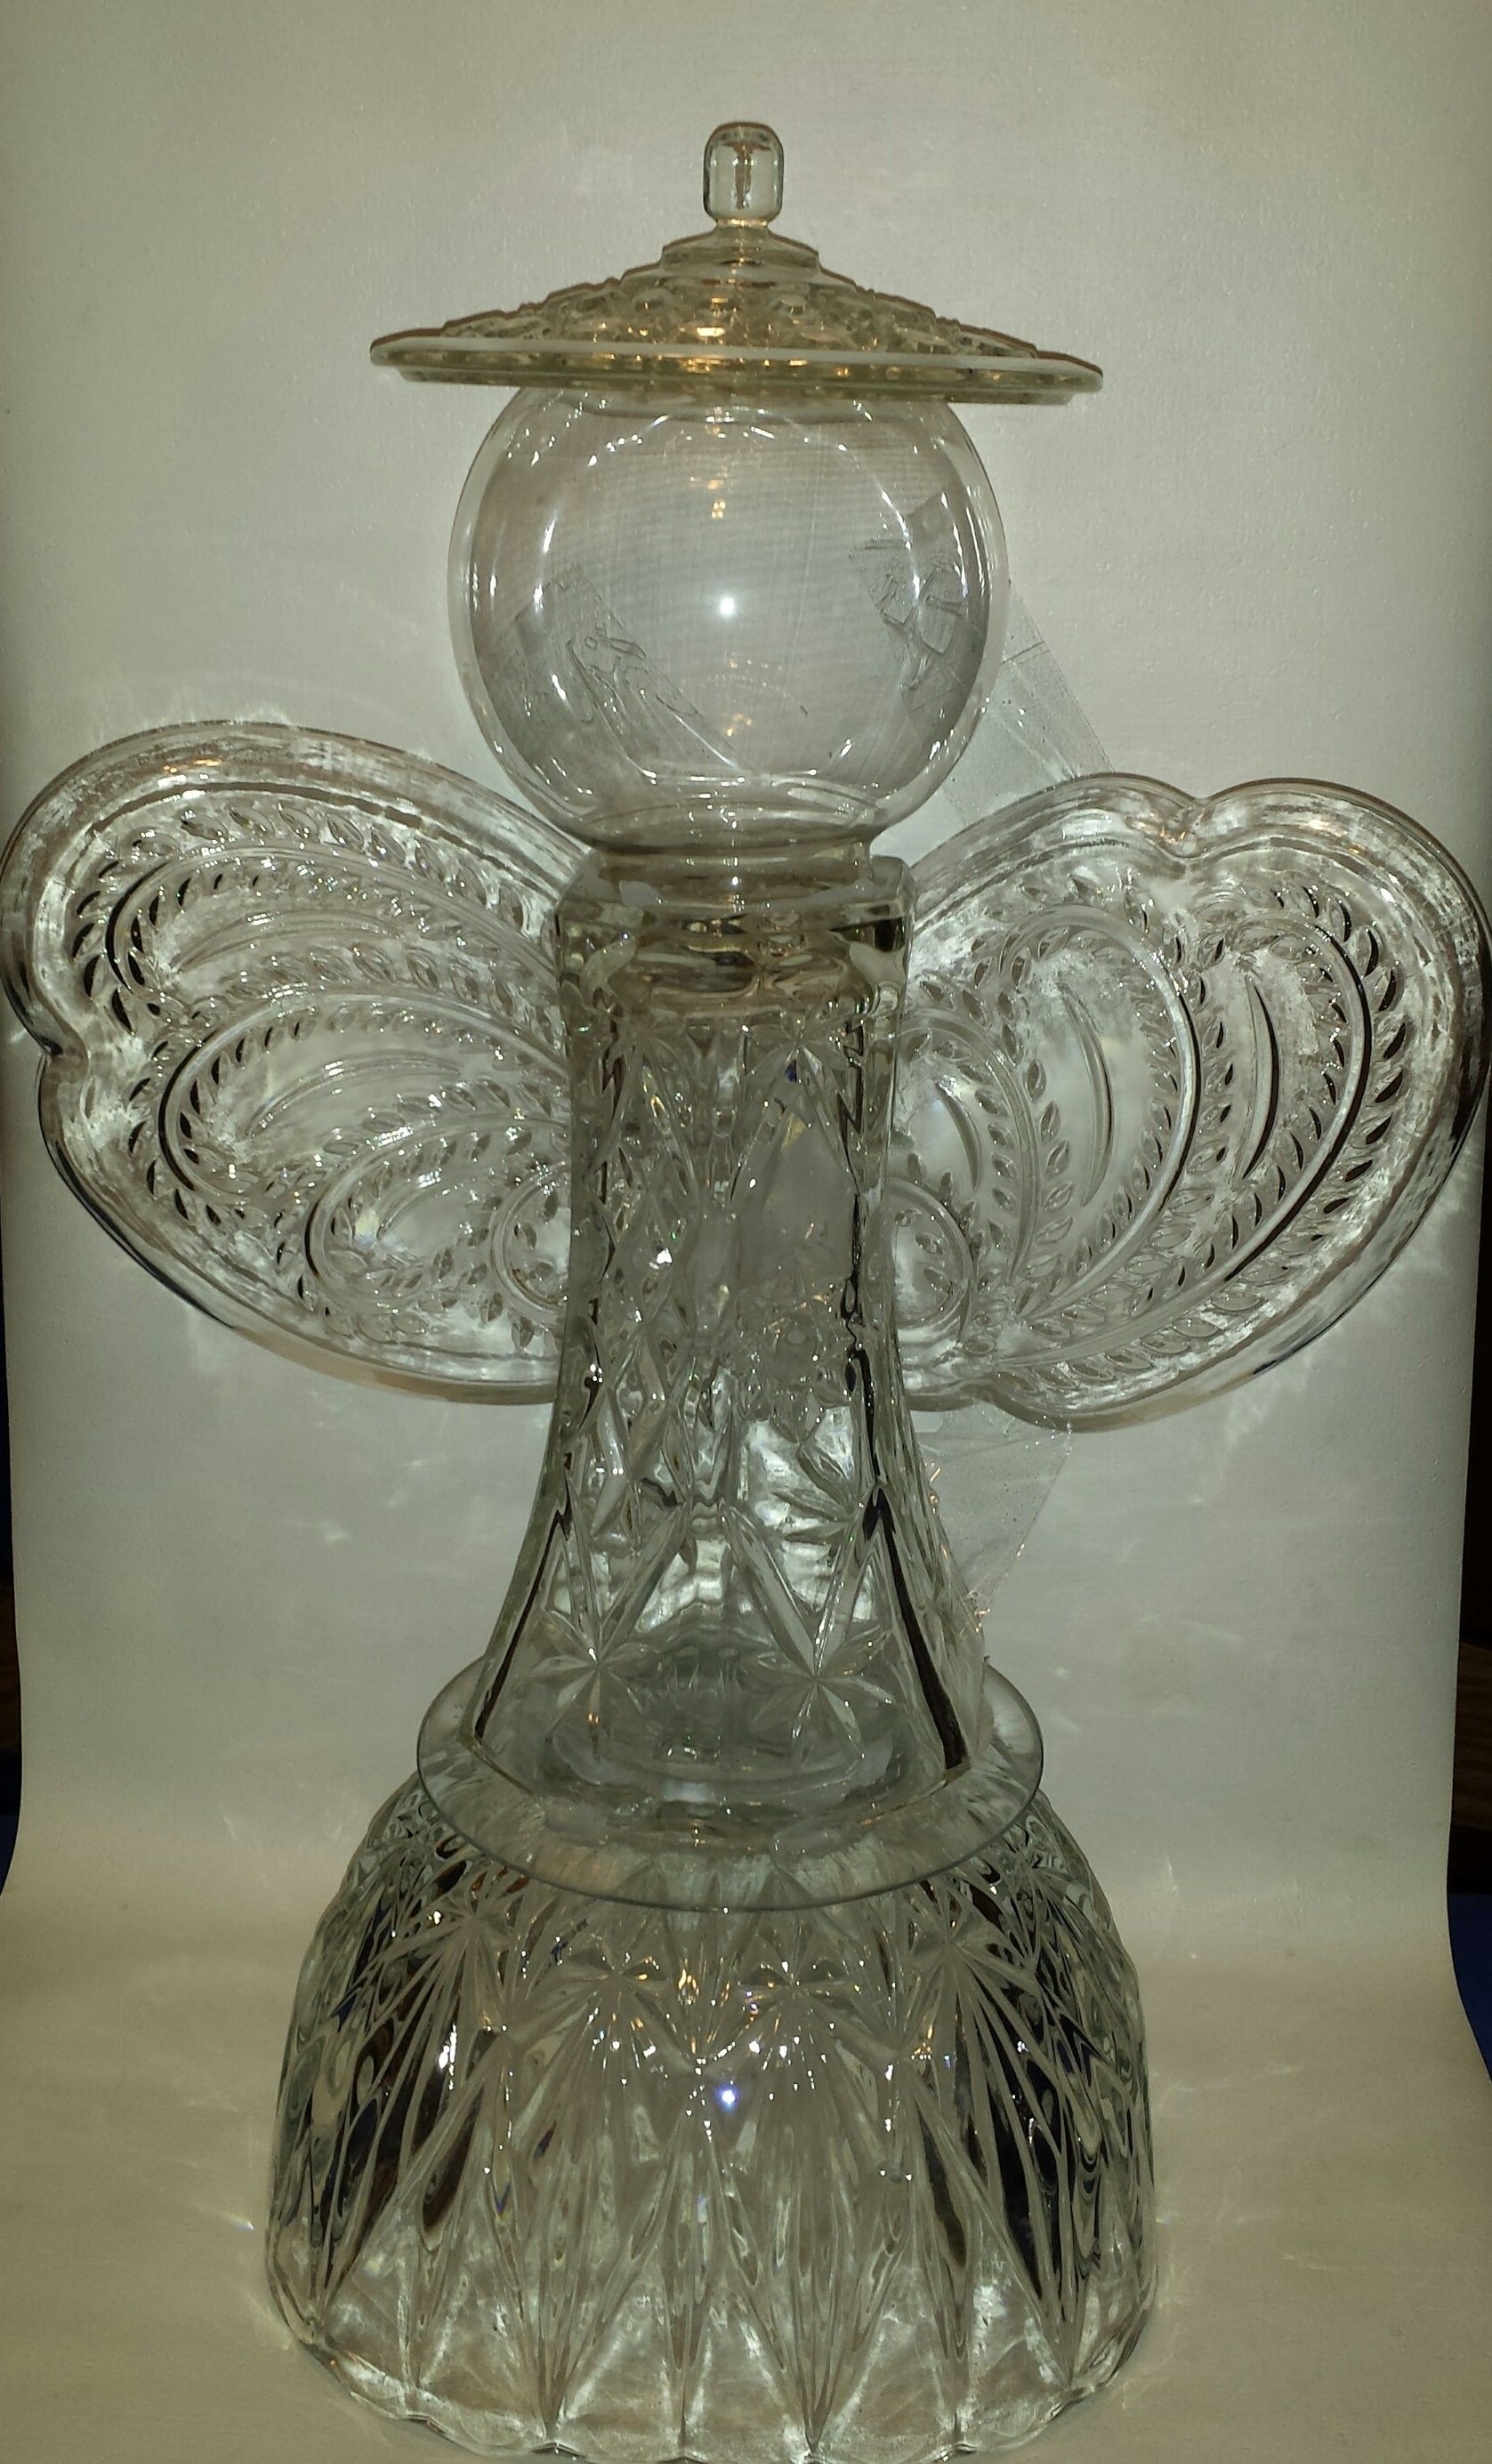 21 Fantastic Small Glass Globe Vases 2024 free download small glass globe vases of 24 glass angel i made from punch bowls vases light globes and in 24 glass angel i made from punch bowls vases light globes and candy